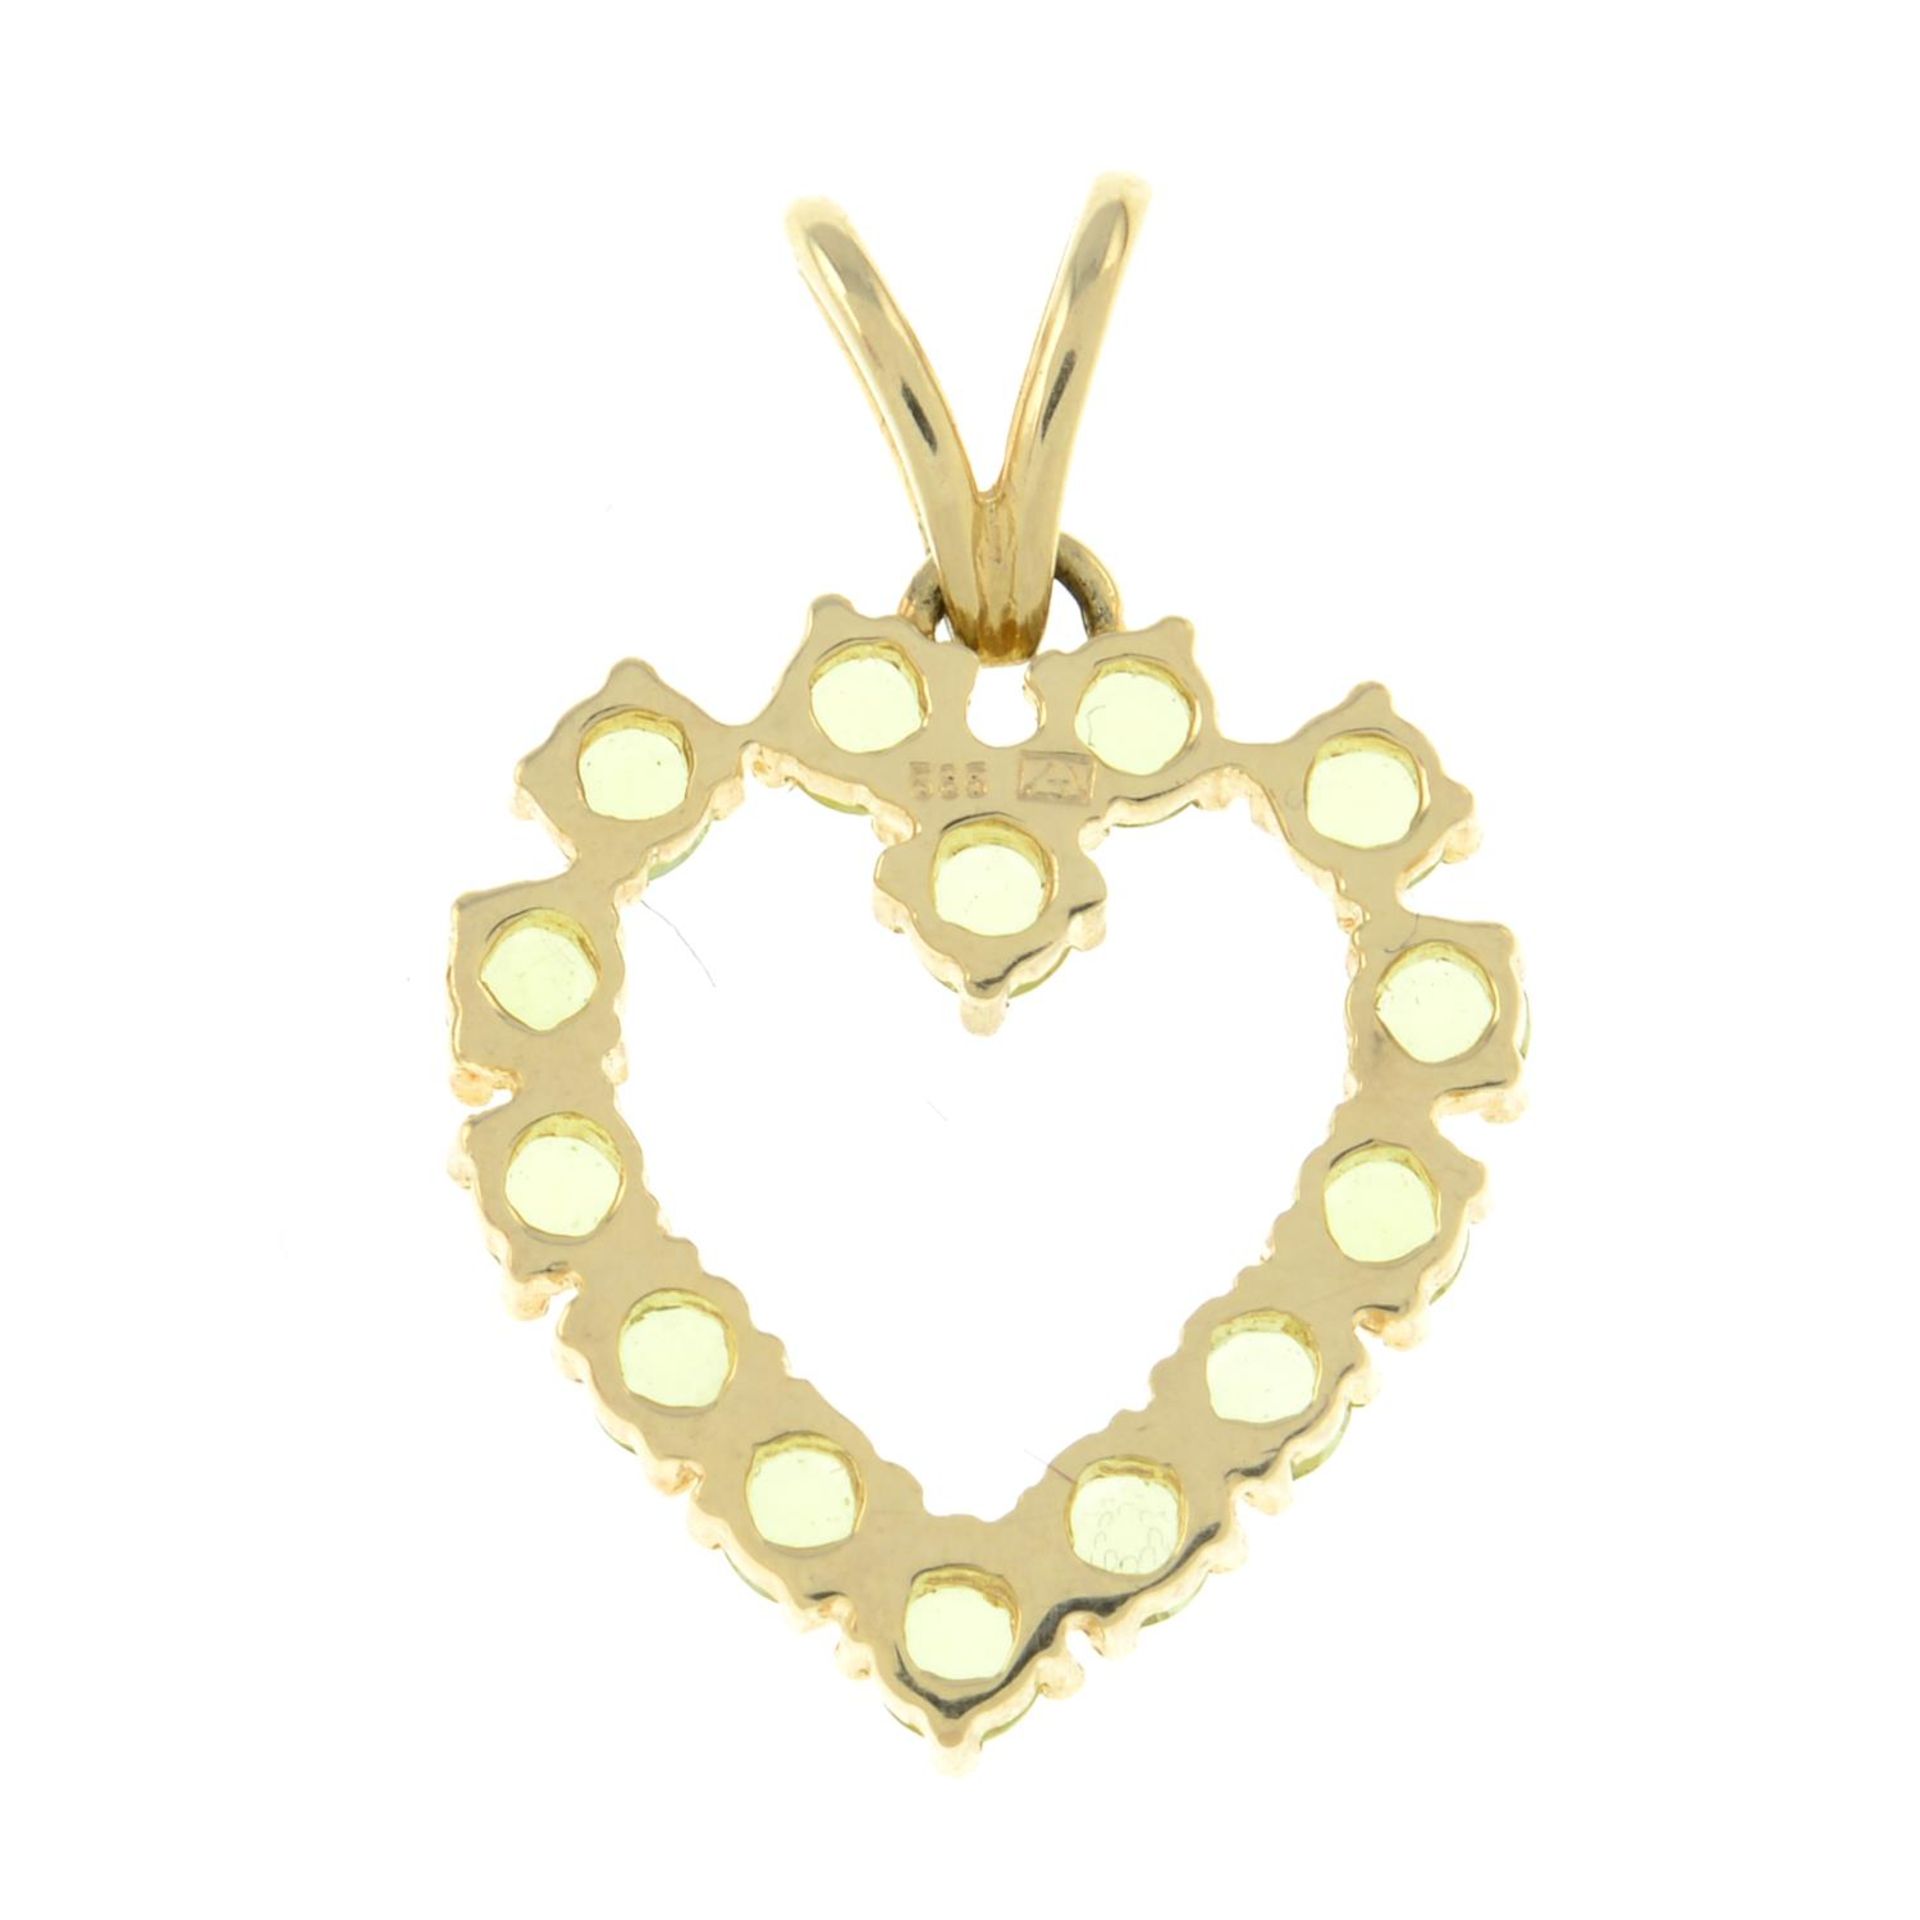 A chrysoberyl heart pendant.Stamped 585.Length 2.7cms. - Image 2 of 2